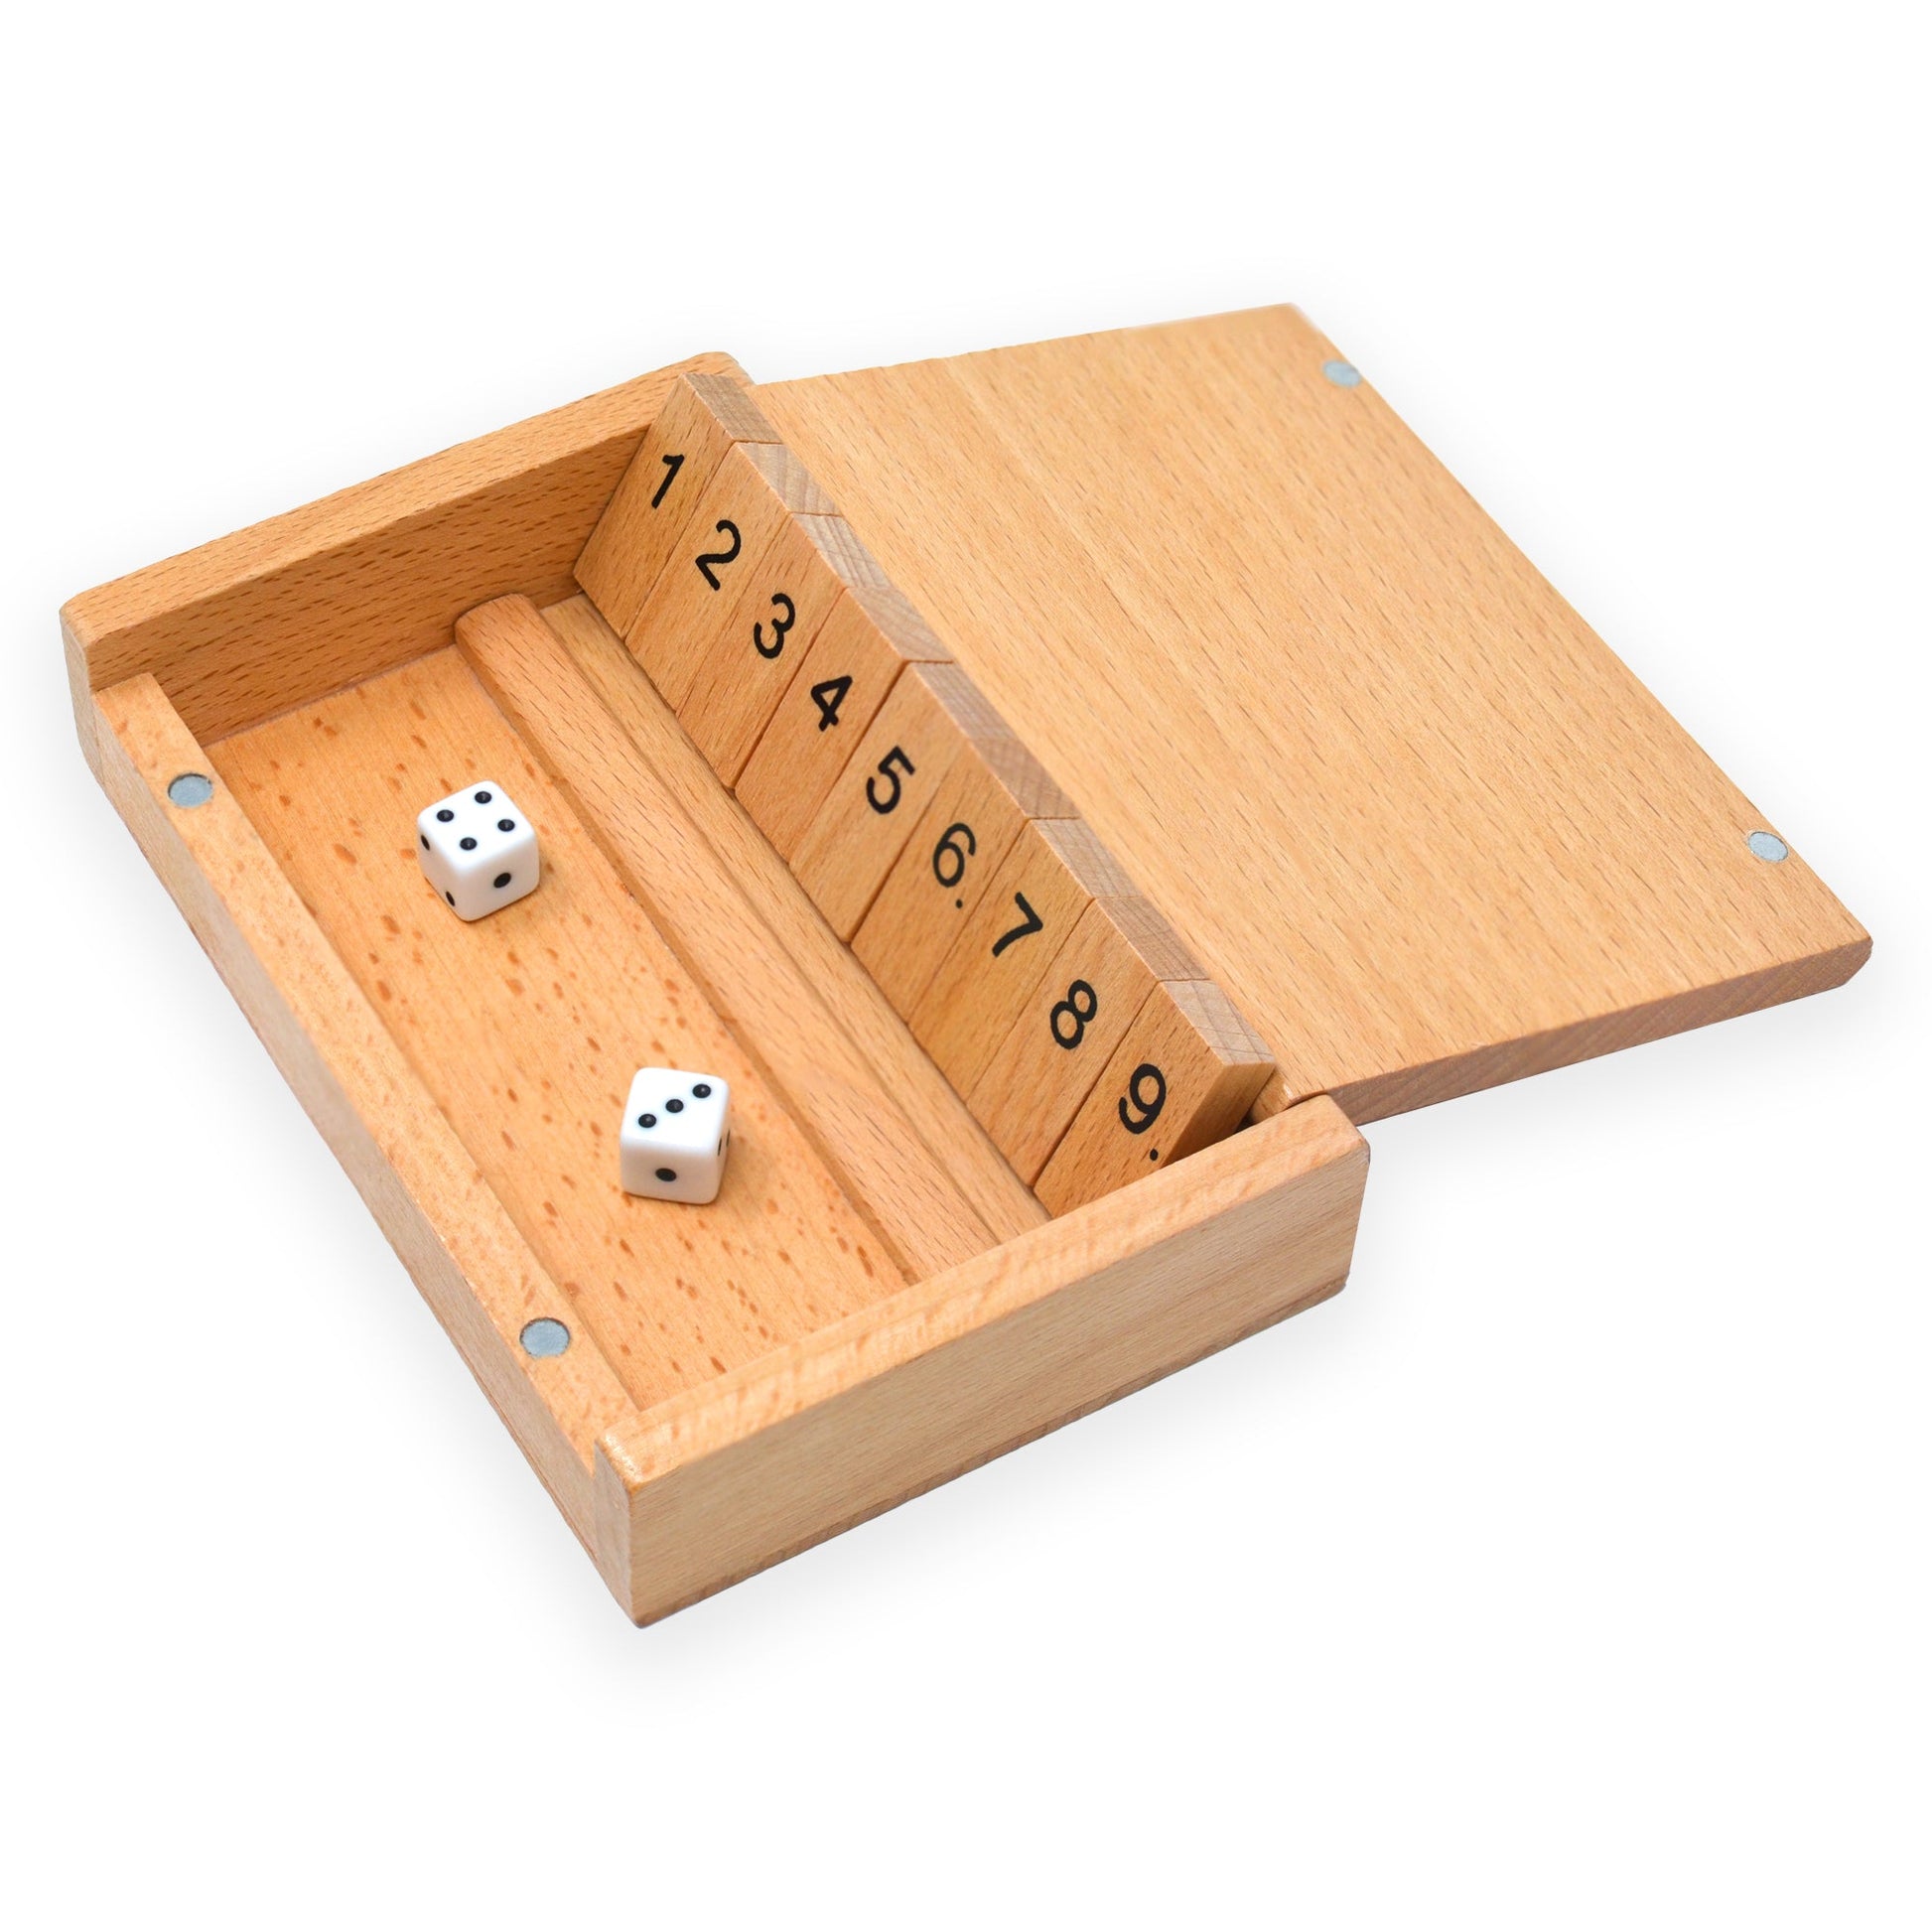 Top-down view of an open Shut The Box Wooden Dice Game with unflipped numbered tiles and two mini dice